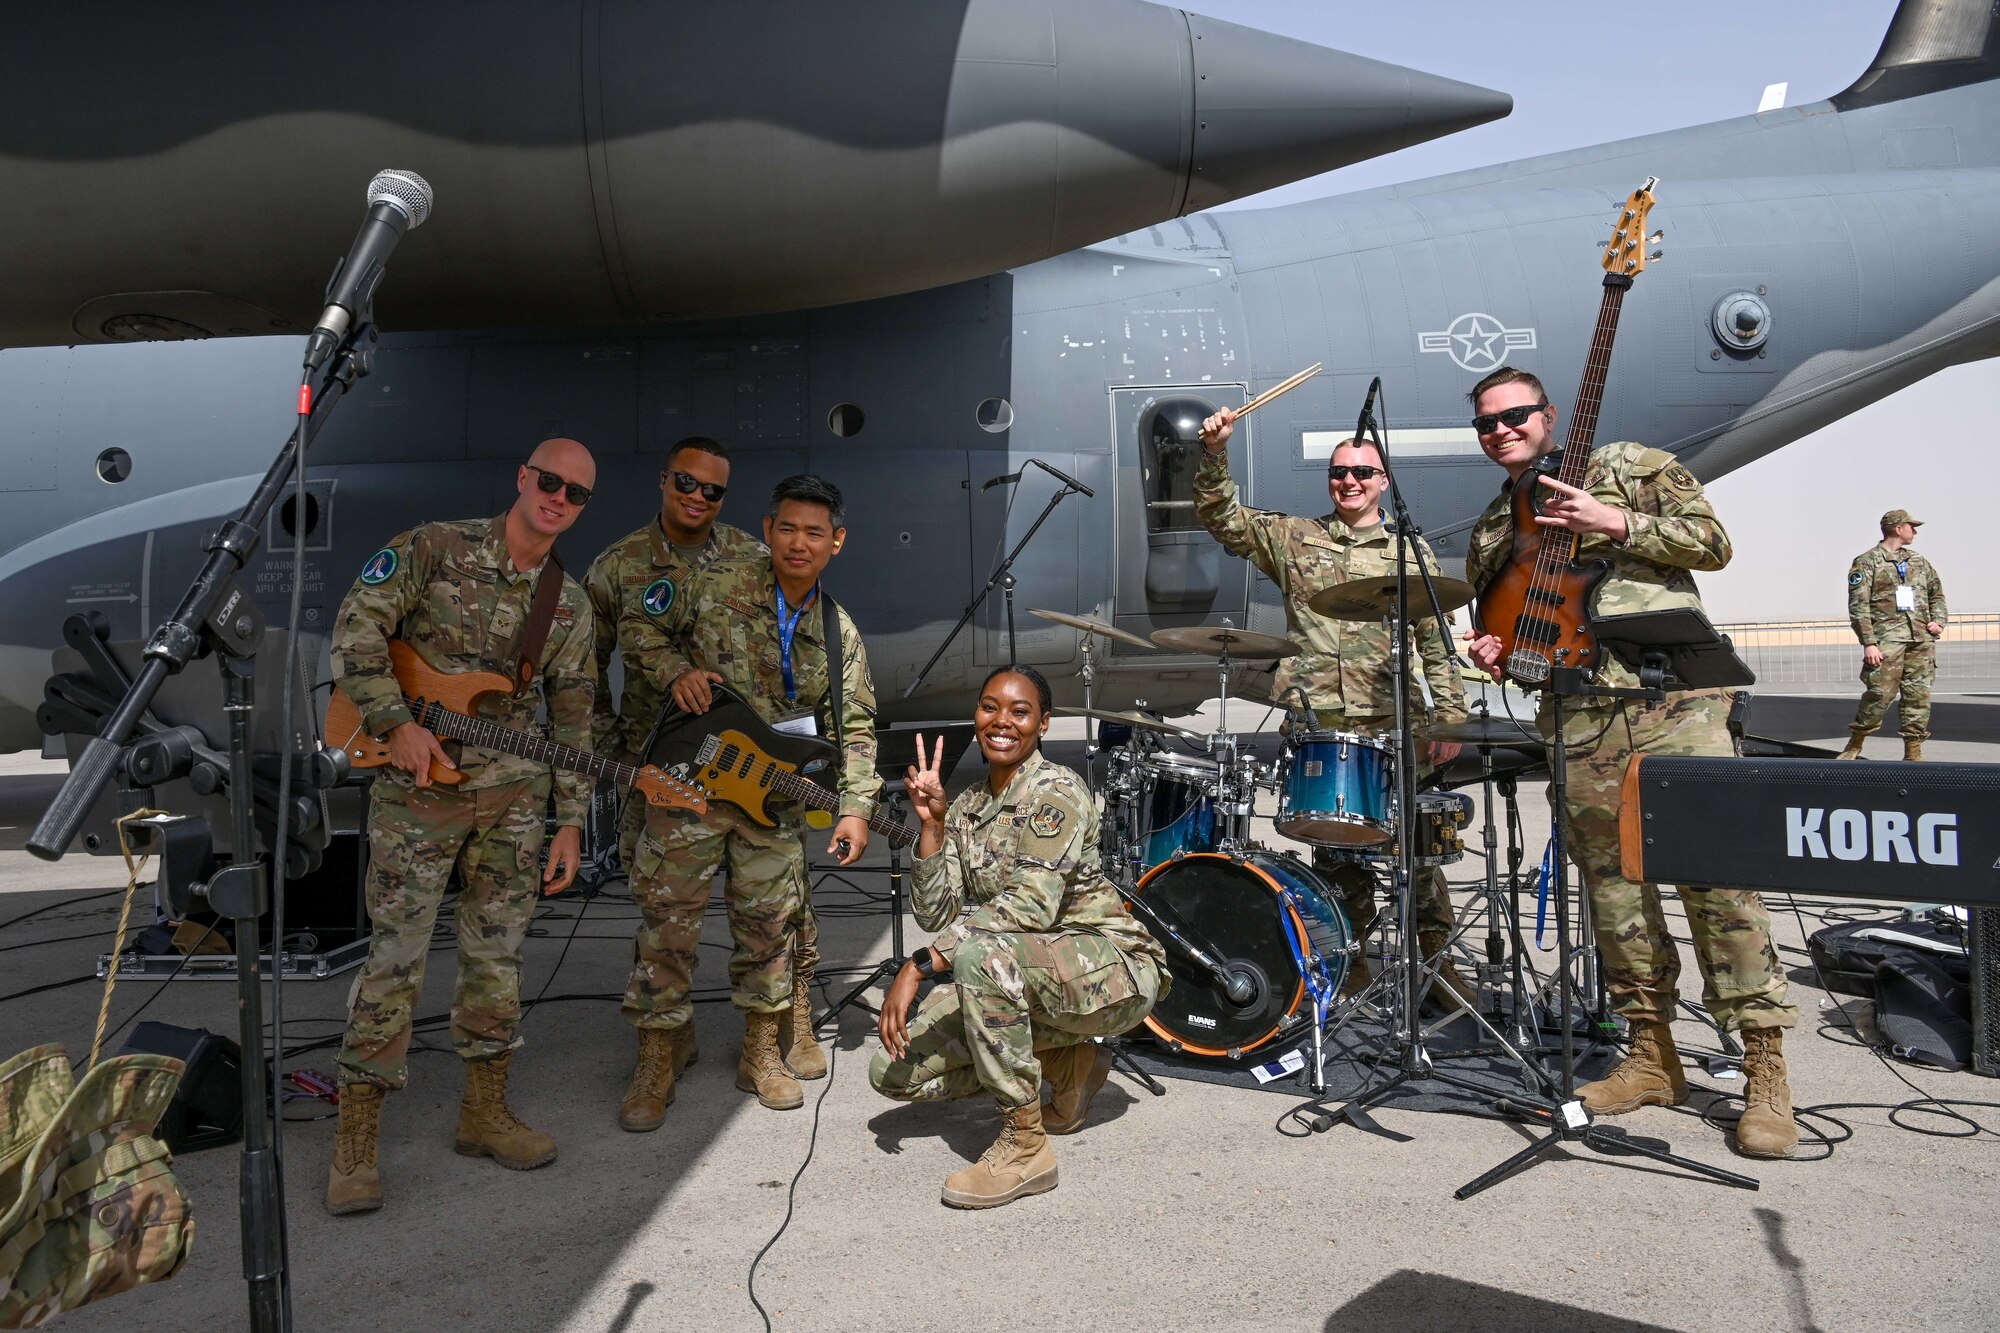 U.S. Air Force personnel assigned to the Air Forces Central Band pose for a photo during the Saudi World Defense Show at an undisclosed location in the Central Command area of responsibility, Feb. 4, 2024. U.S. military participation in the Saudi World Defense Show allows foreign military and civilian decision-makers an opportunity to evaluate and compare U.S. Air Force aircraft in a non-operational and threat-free environment.  (U.S. Air Force courtesy photo)